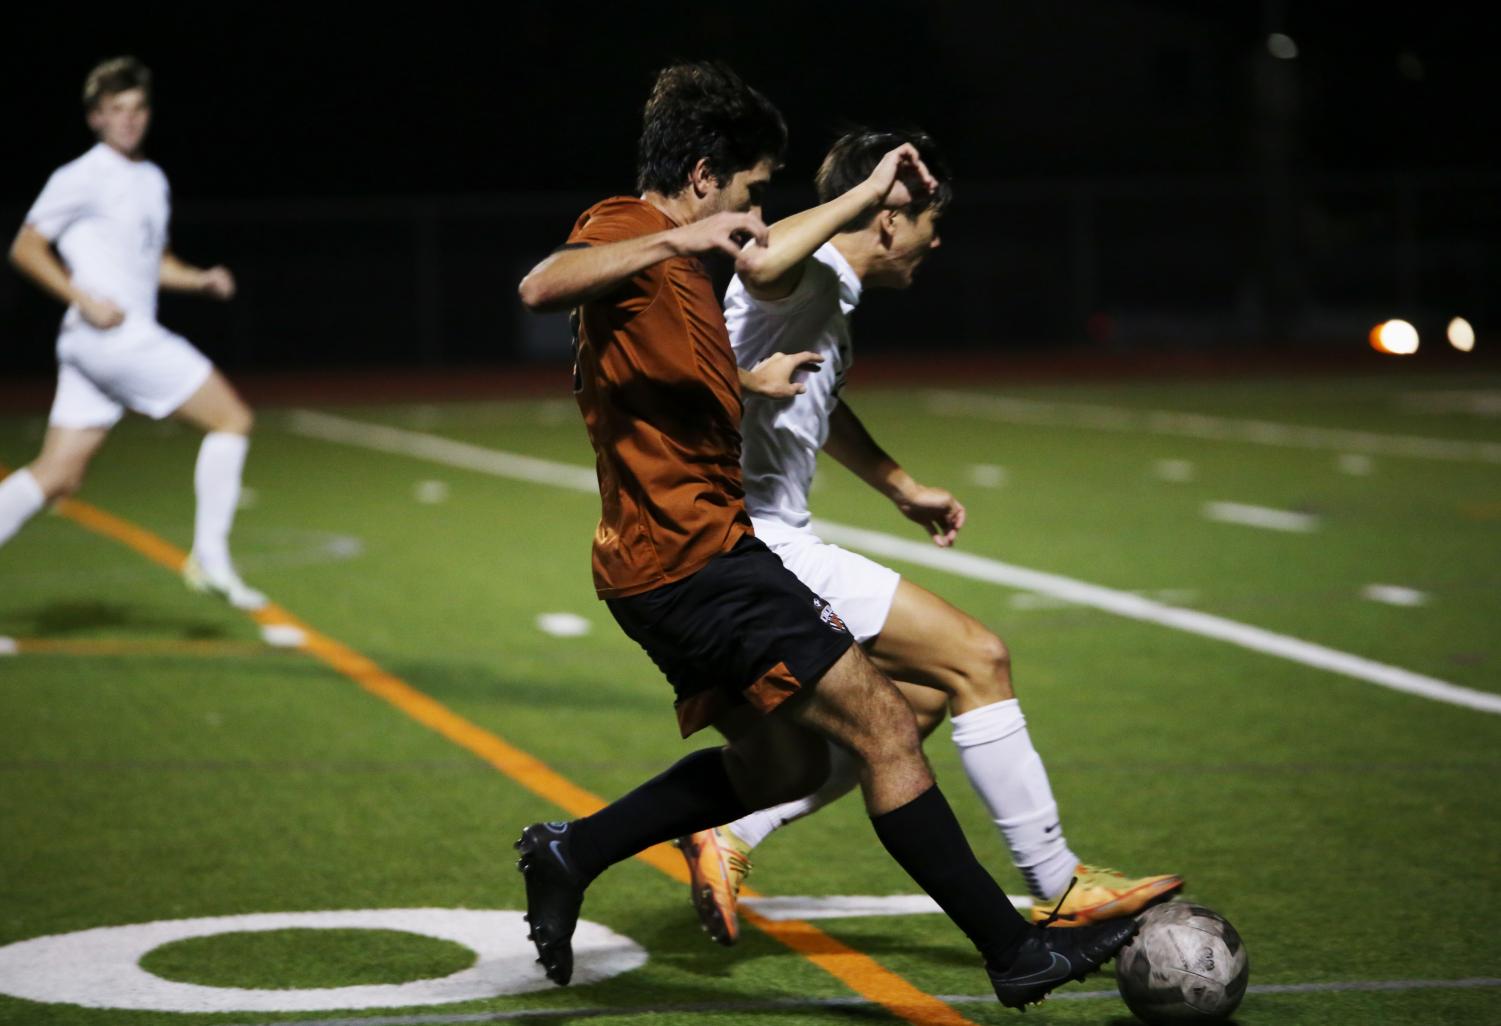 %5BGALLERY%5D%3A+Varsity+Mens+Soccer+Clinches+District+Champion+Title+Following+1-0+Win+Against+Vipers